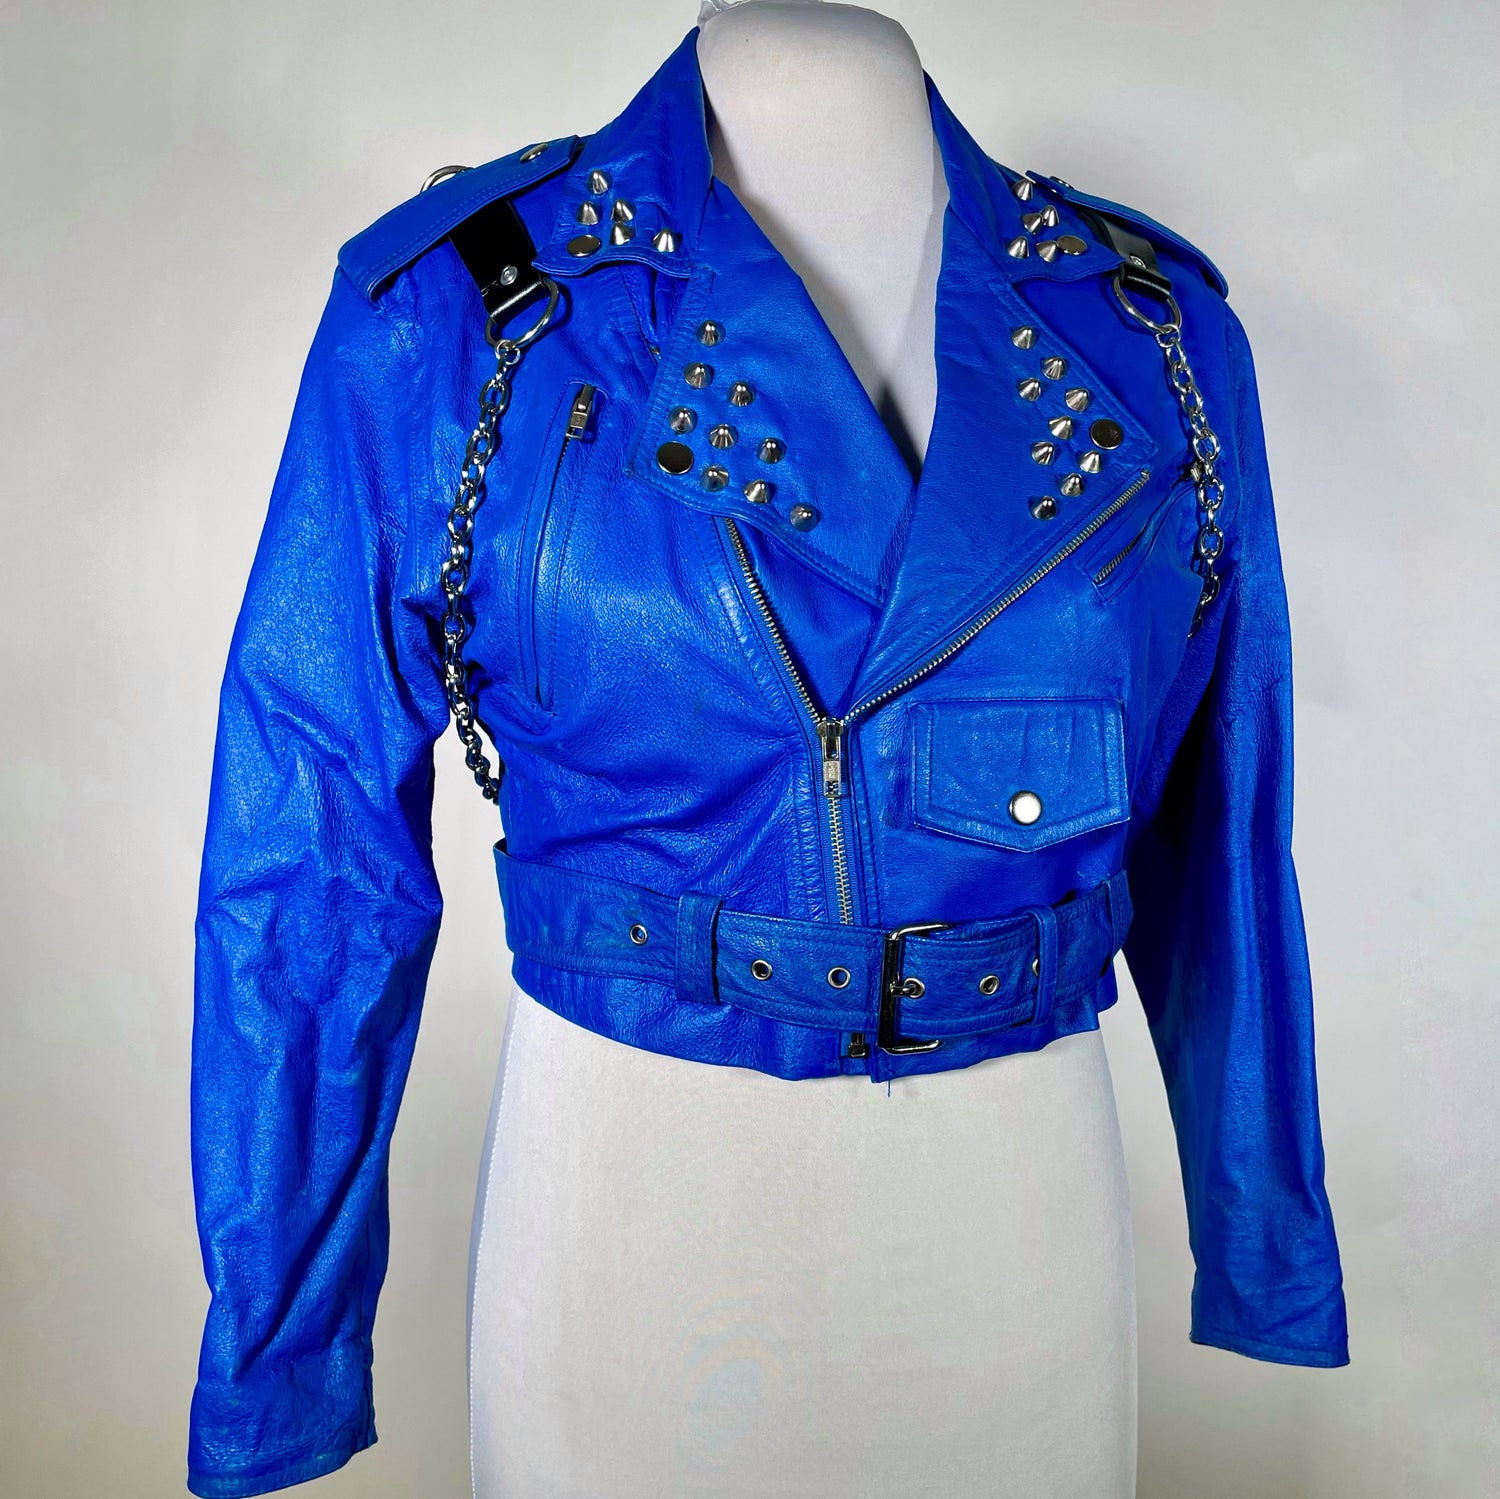 Blue moto jacket with harness and chains studded biker vintage jacket goth tradgoth cyberpunk acid house new beat industrial punk deathrock drag 